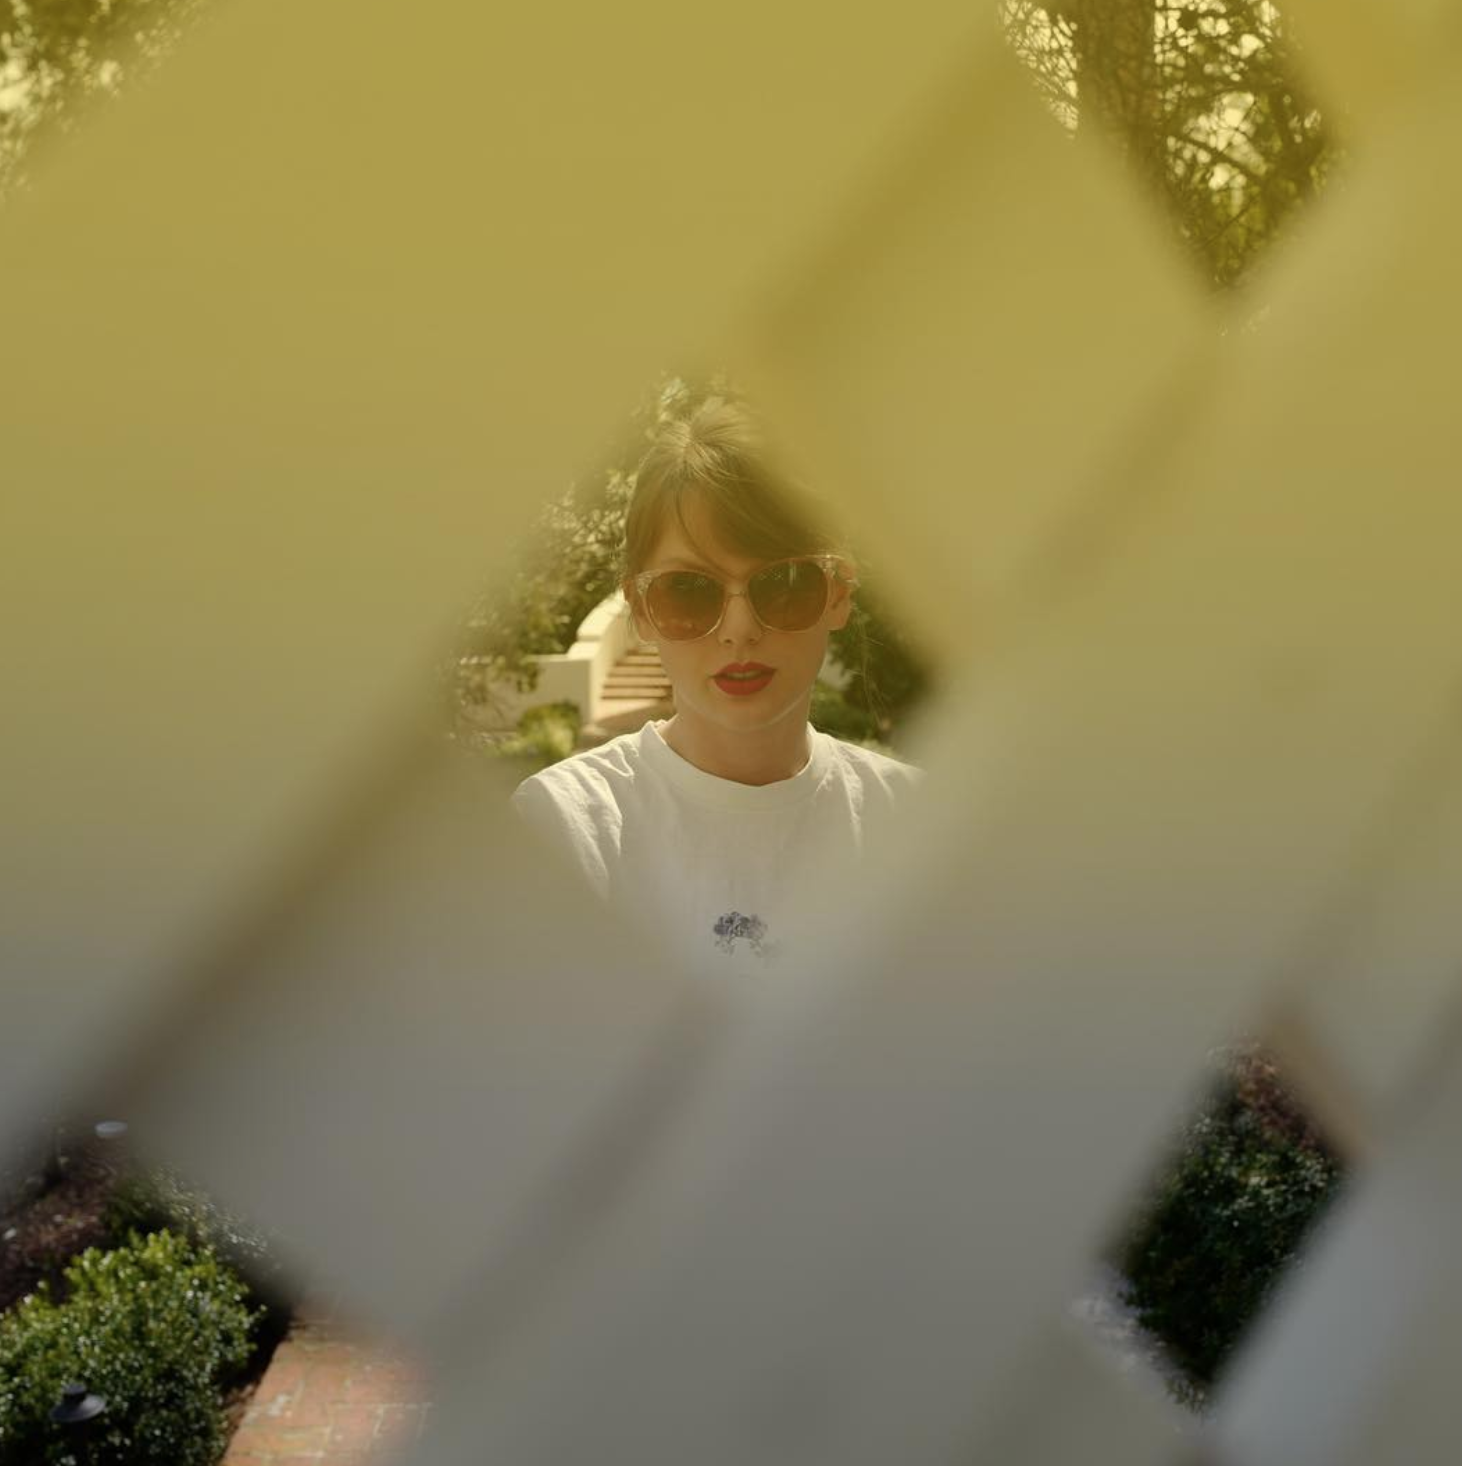 BUT THERE WERE FIVE HOLES IN THE FENCE- Taylor Swift